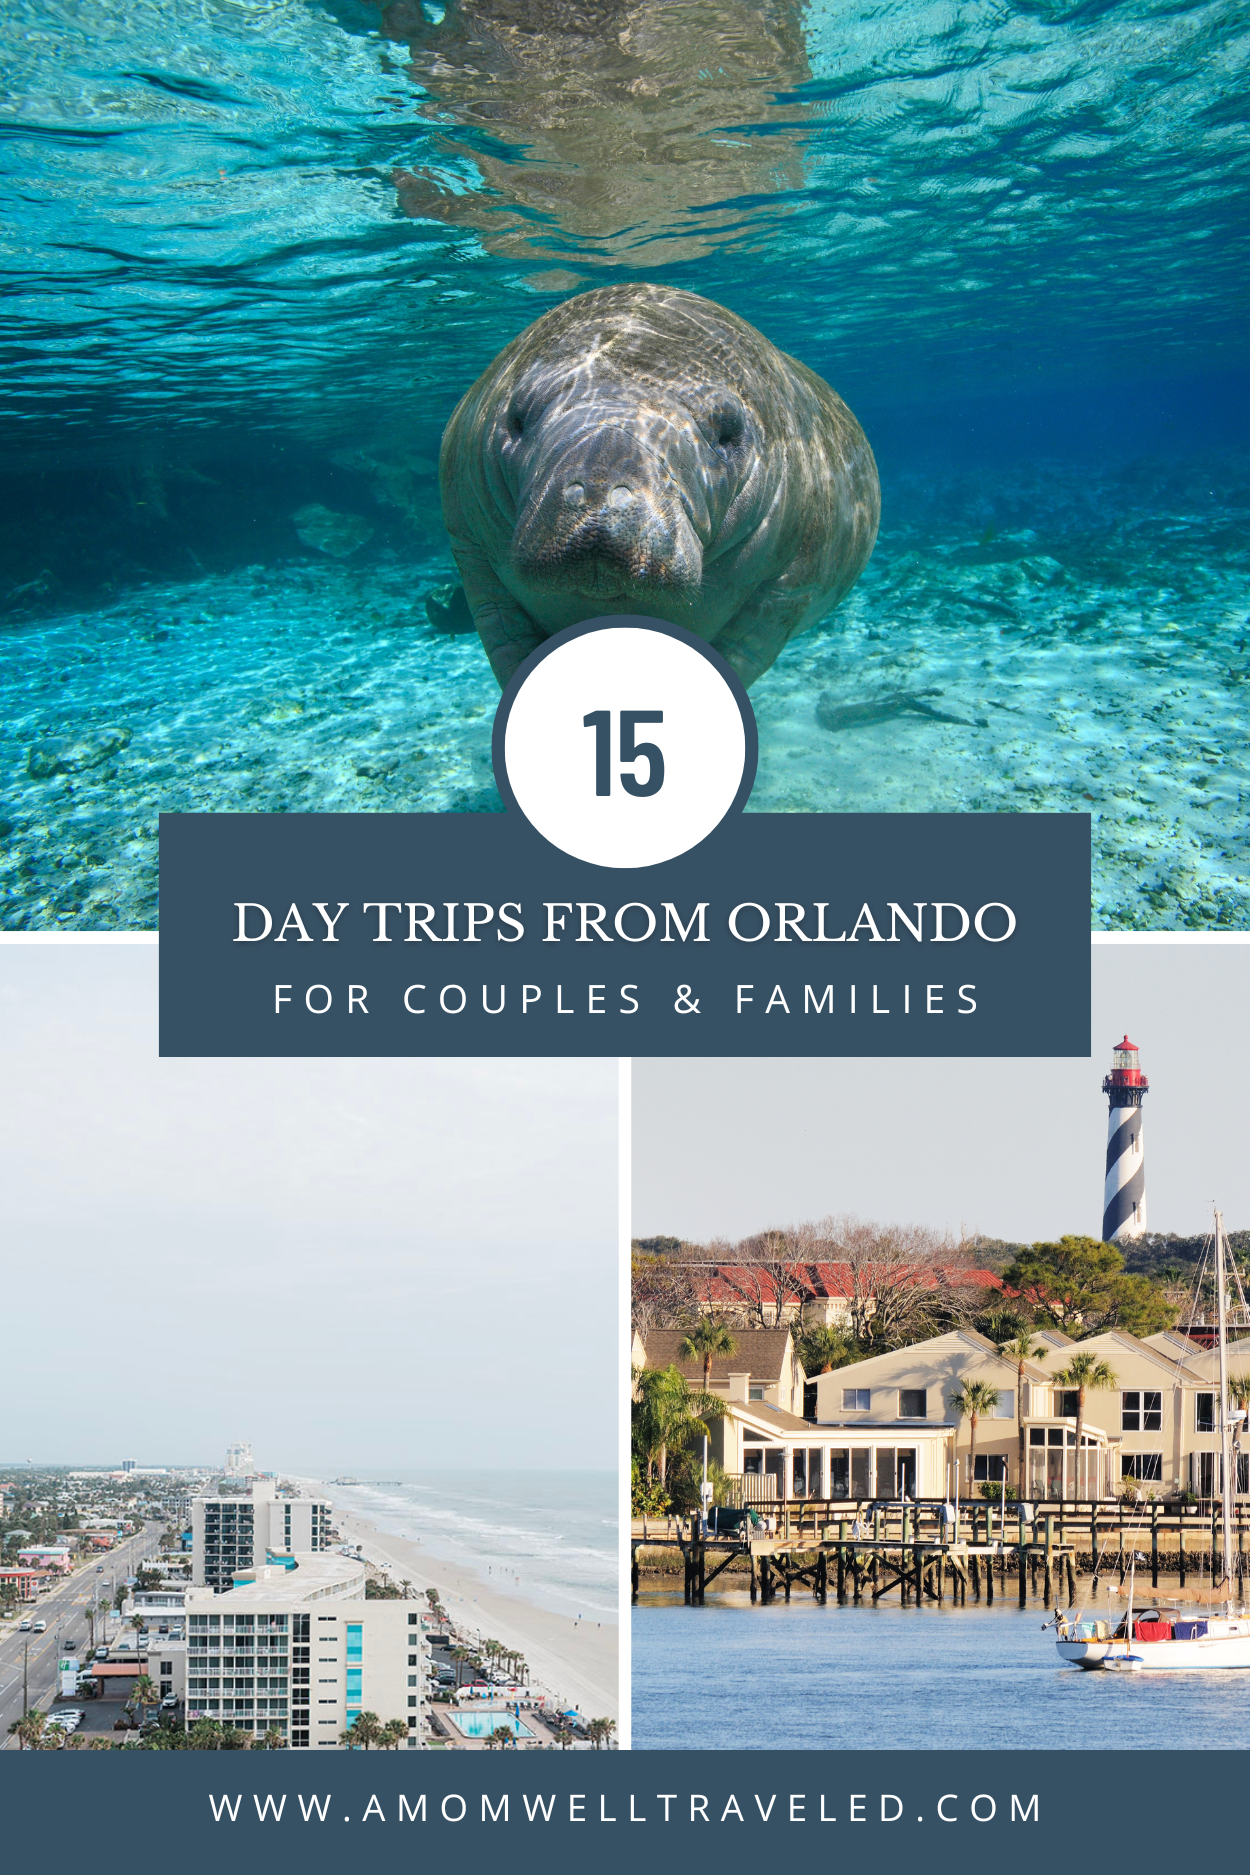 15 great day trips from Orlando for couples and families